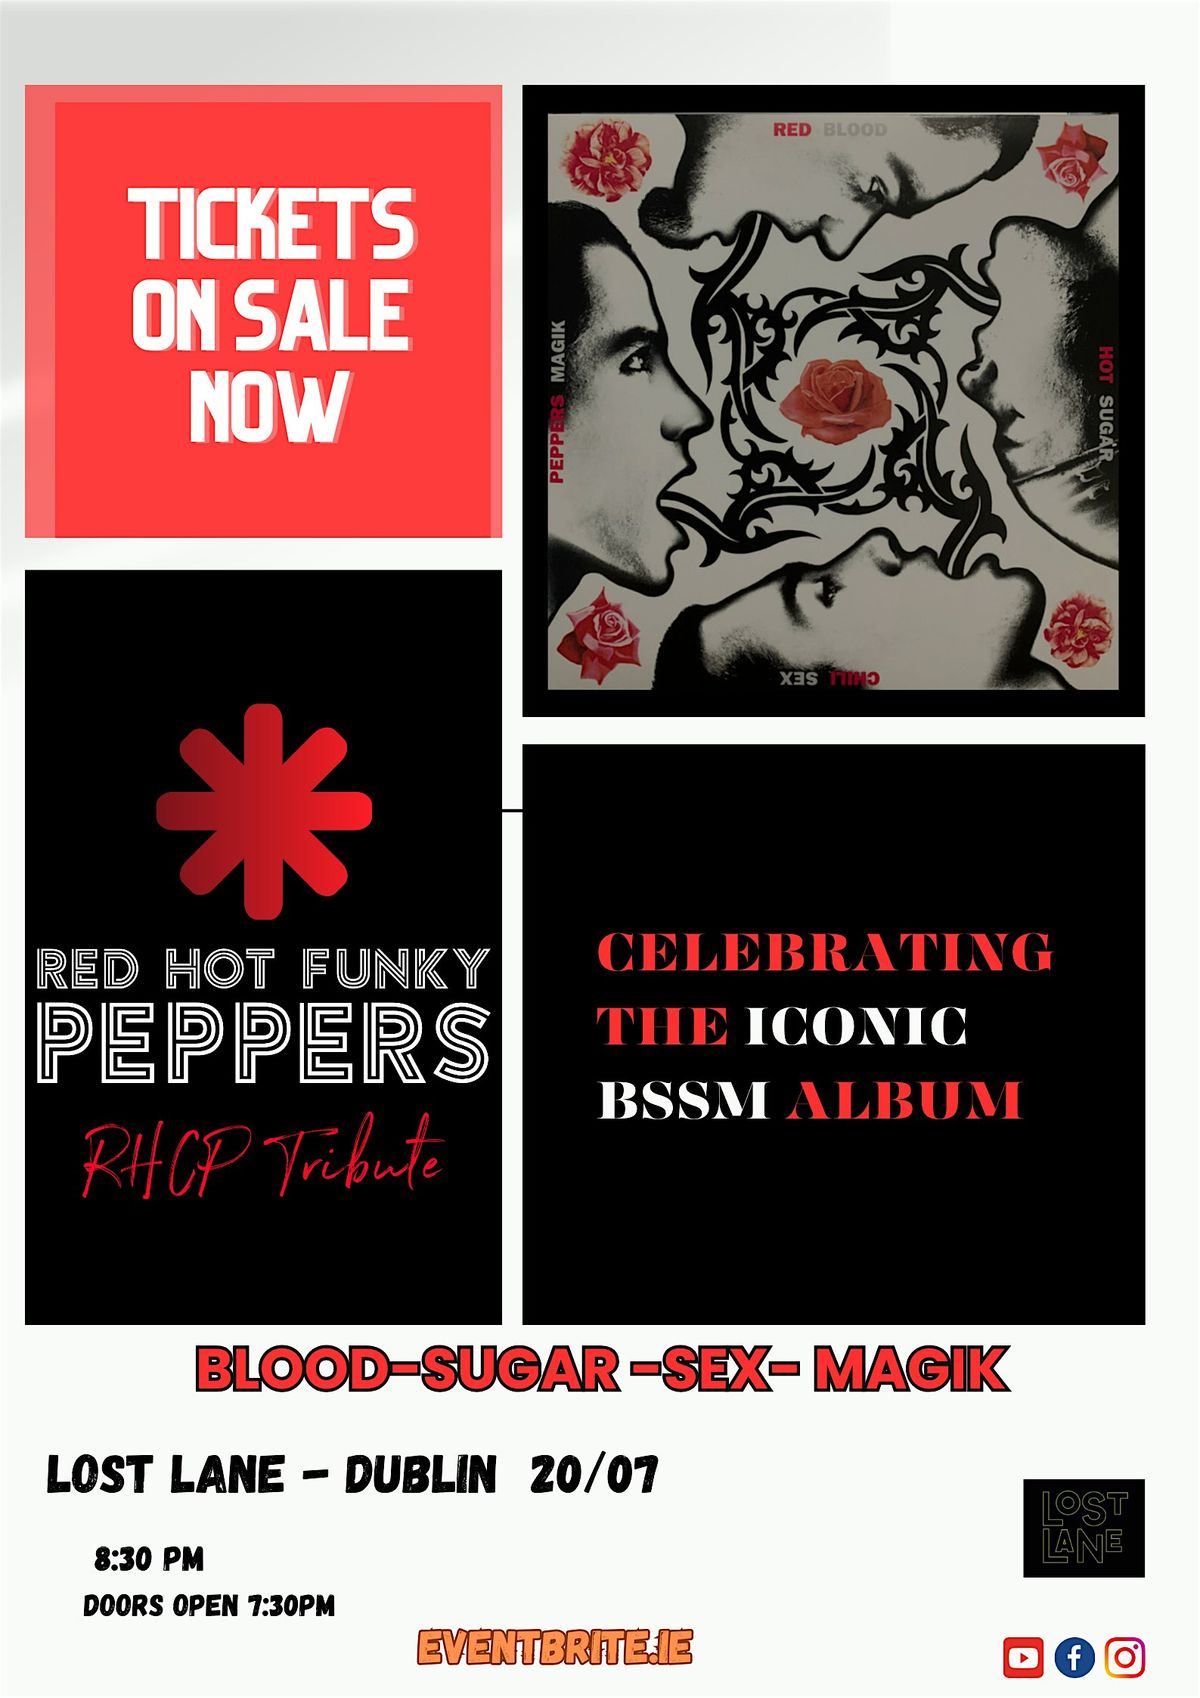 Red Hot Funky Peppers BLOOD SUGAR SEX MAGIK Tour